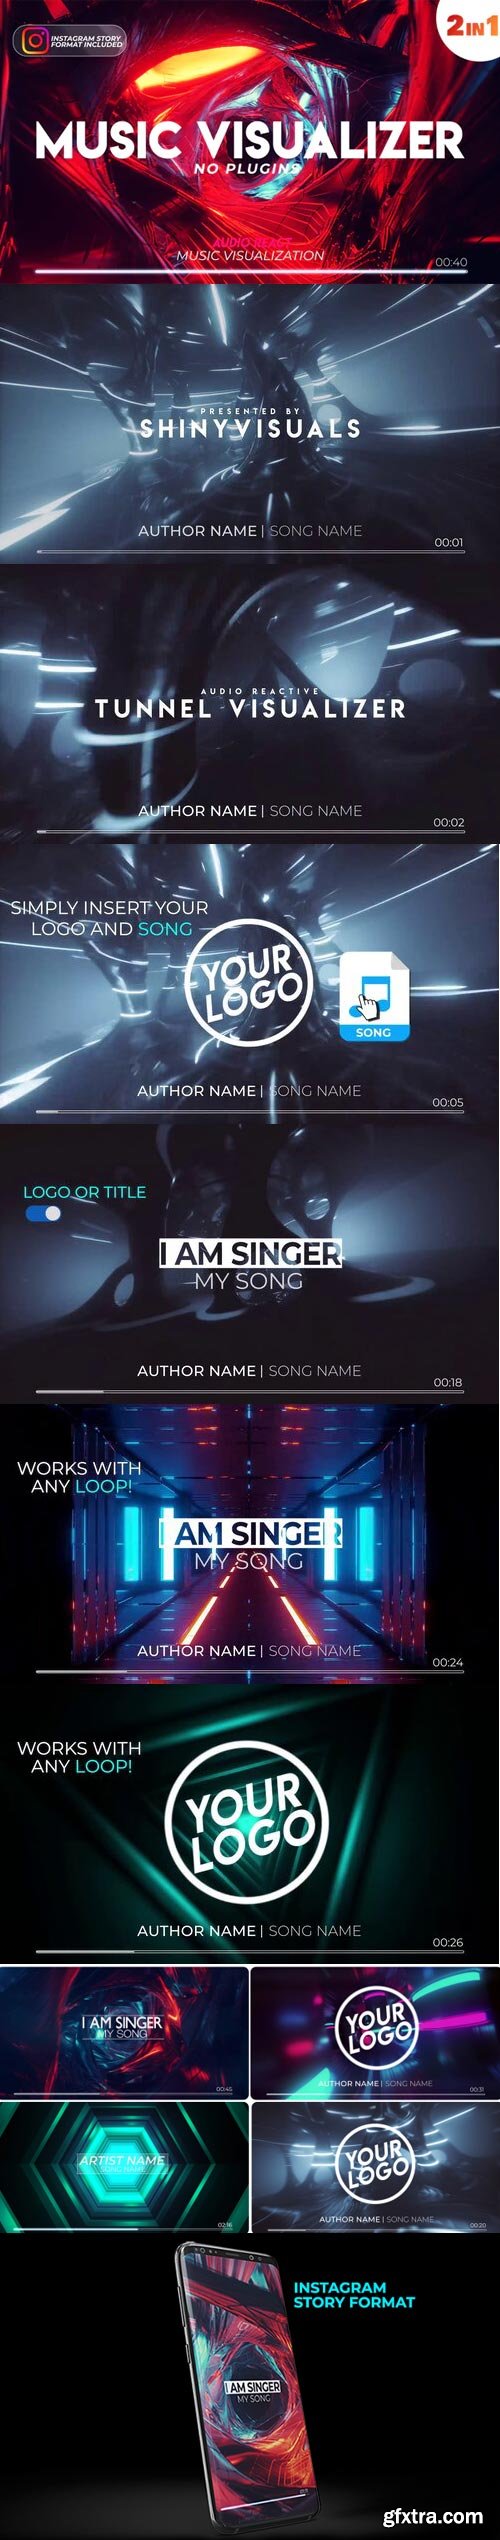 Videohive - Music Visualizer Tunnel with Audio Spectrum - 25505054